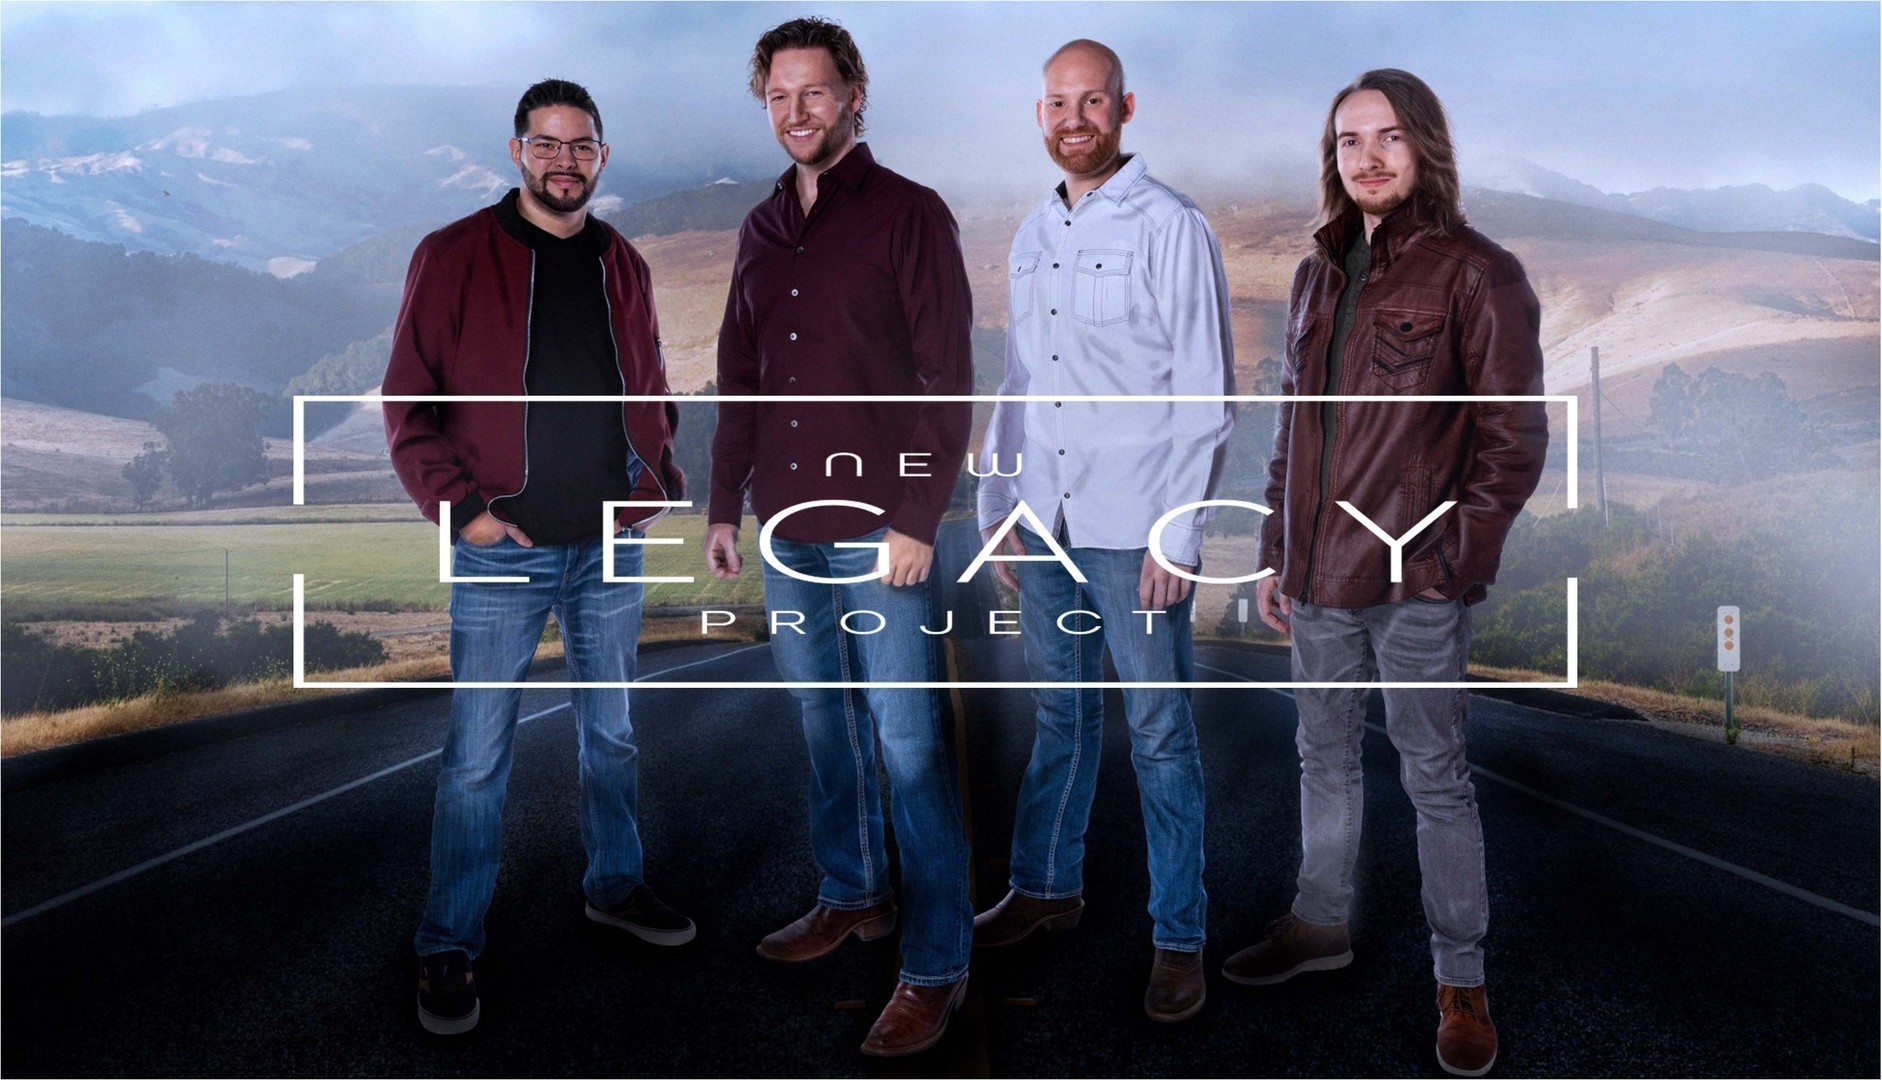 Live JANUARY Concert in PHOENIX with Popular Nashville-based Men's Vocal Band, NEW LEGACY PROJECT!, Phoenix, Arizona, United States